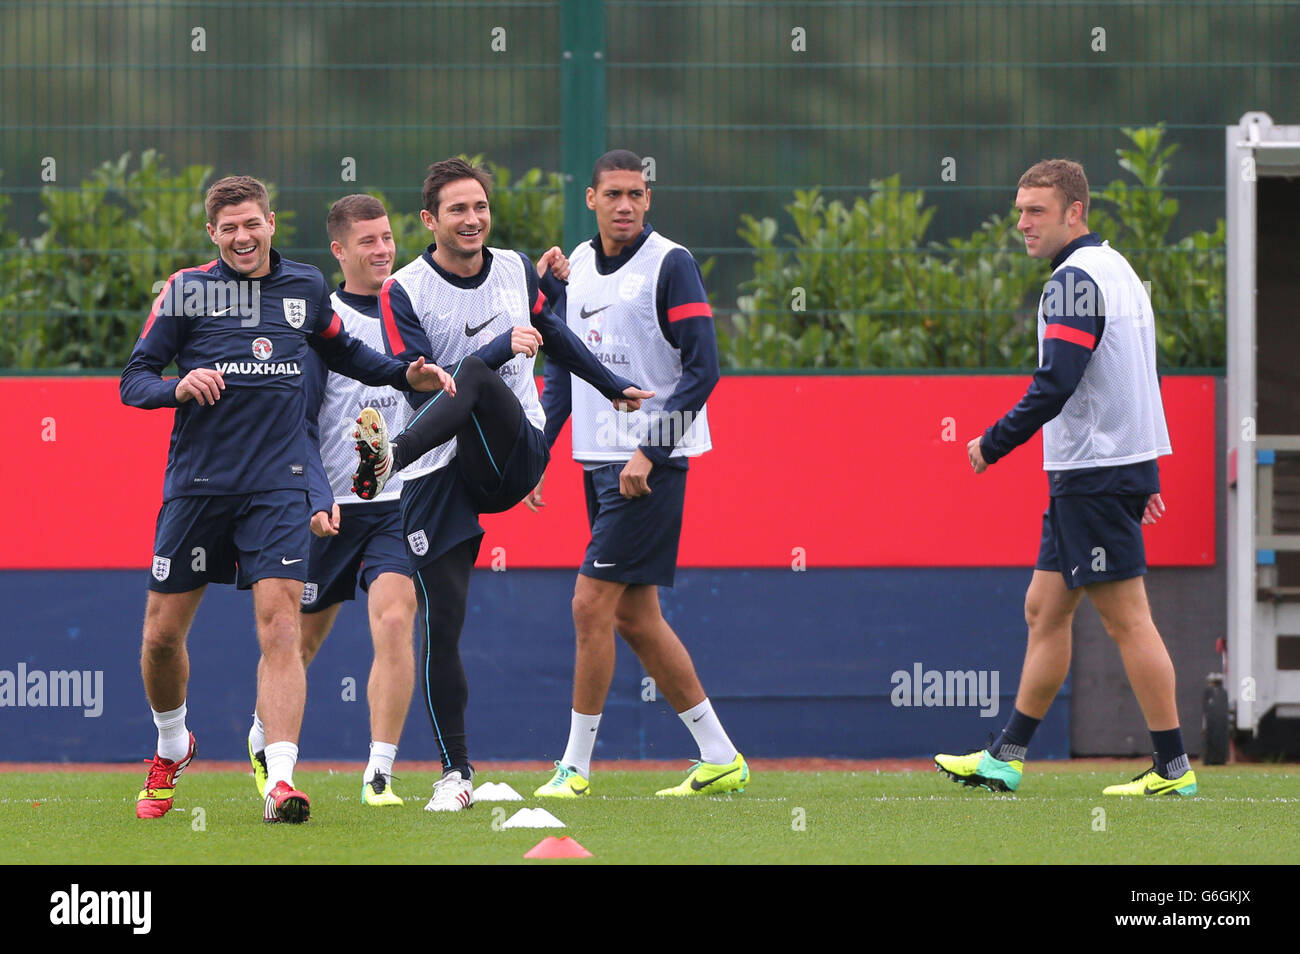 England's Steven Gerrard share a joke as he leads the players in warm up with Frank Lampard, Ross Barkley, Chris Smalling, Ricky Lambert, and (right) during the training session at London Colney, Hertfordshire. Stock Photo